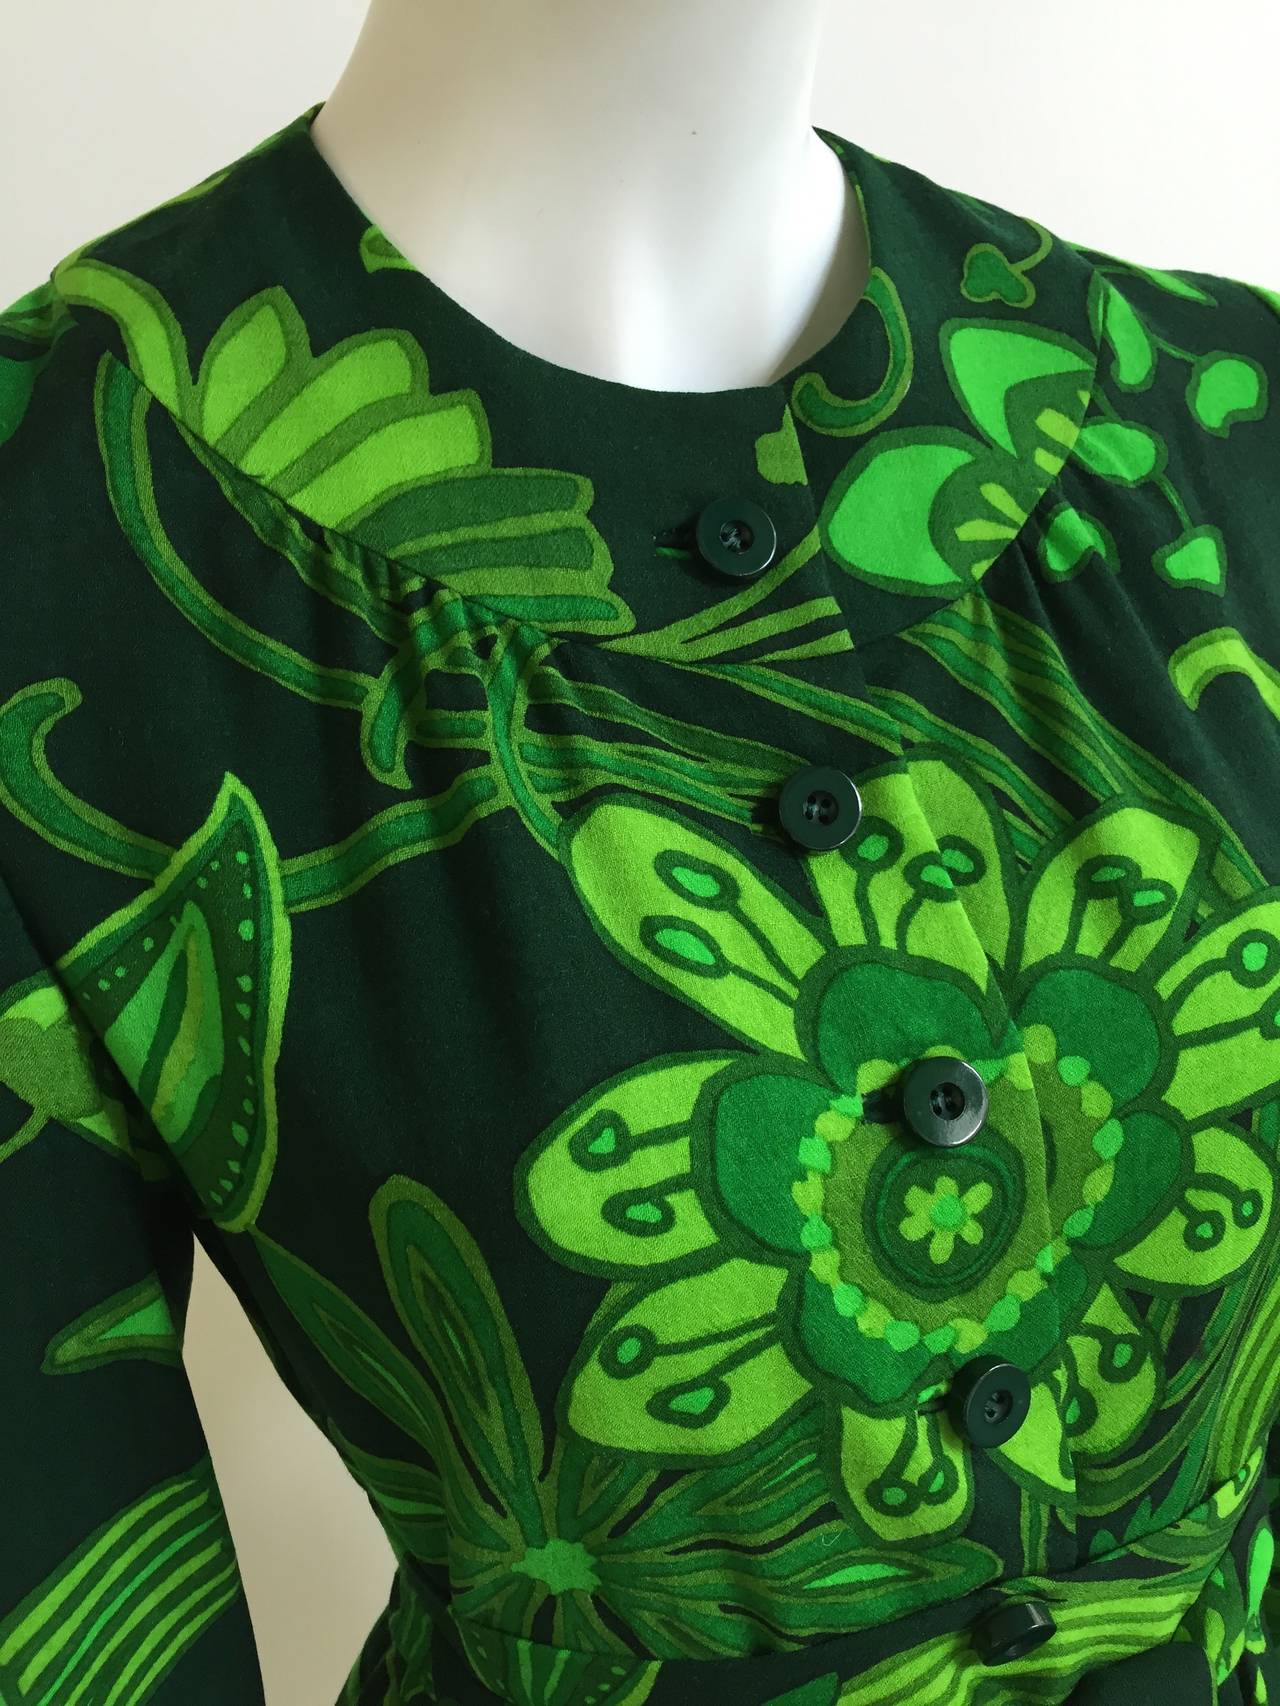 Women's Chester Weinberg 1960s Green Flower Dress with Pockets Size 6.